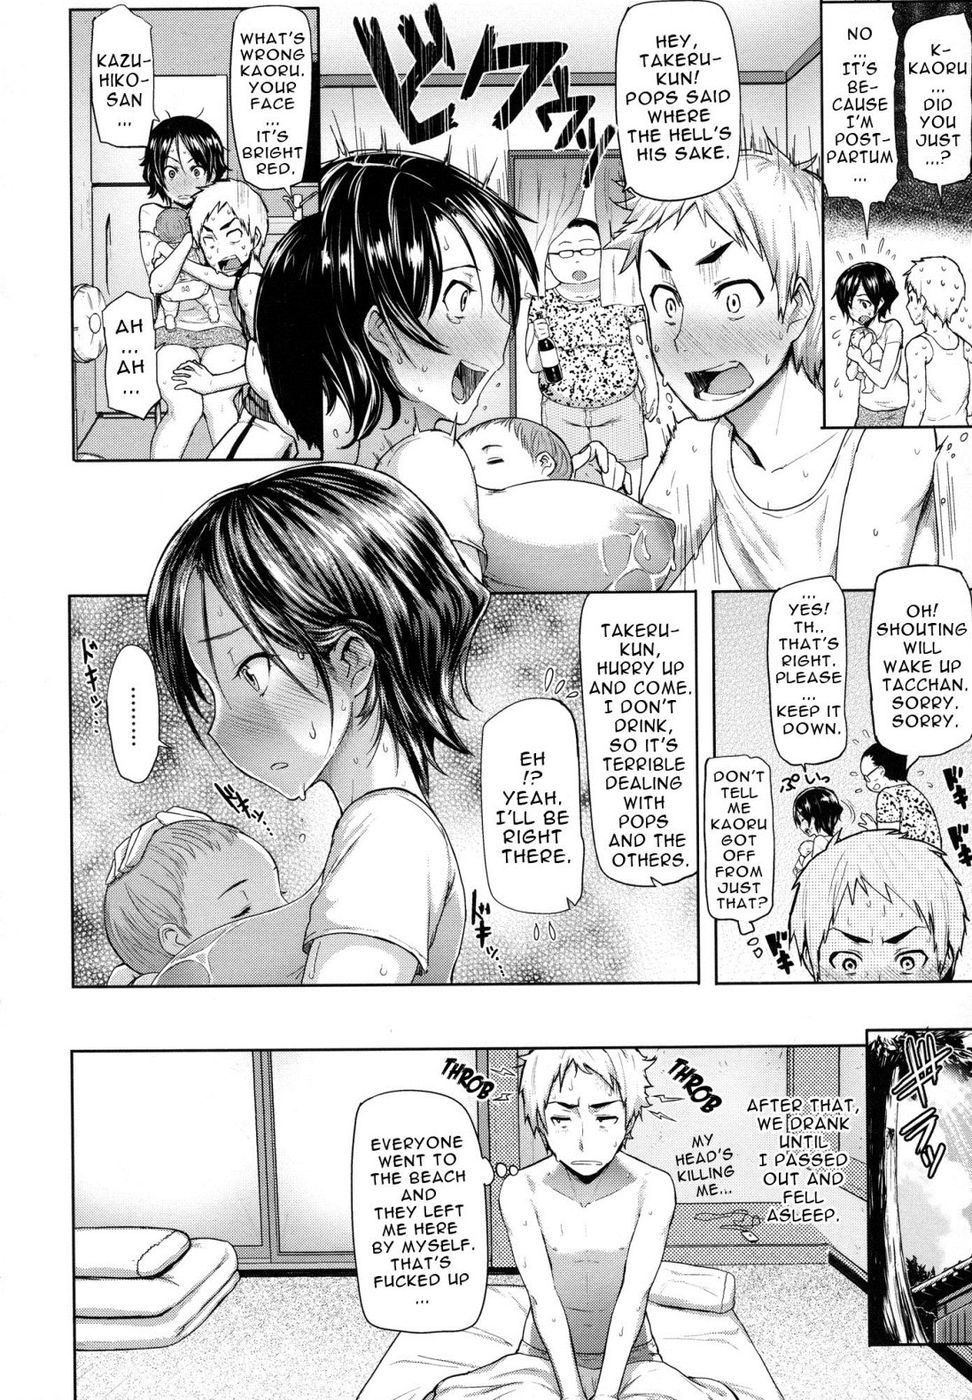 Adult Breastfeeding Hentai - Limit Break 3-Chapter 8-Sister-Milking-Hentai Manga Hentai Comic - Page: 4  - Online porn video at mobile